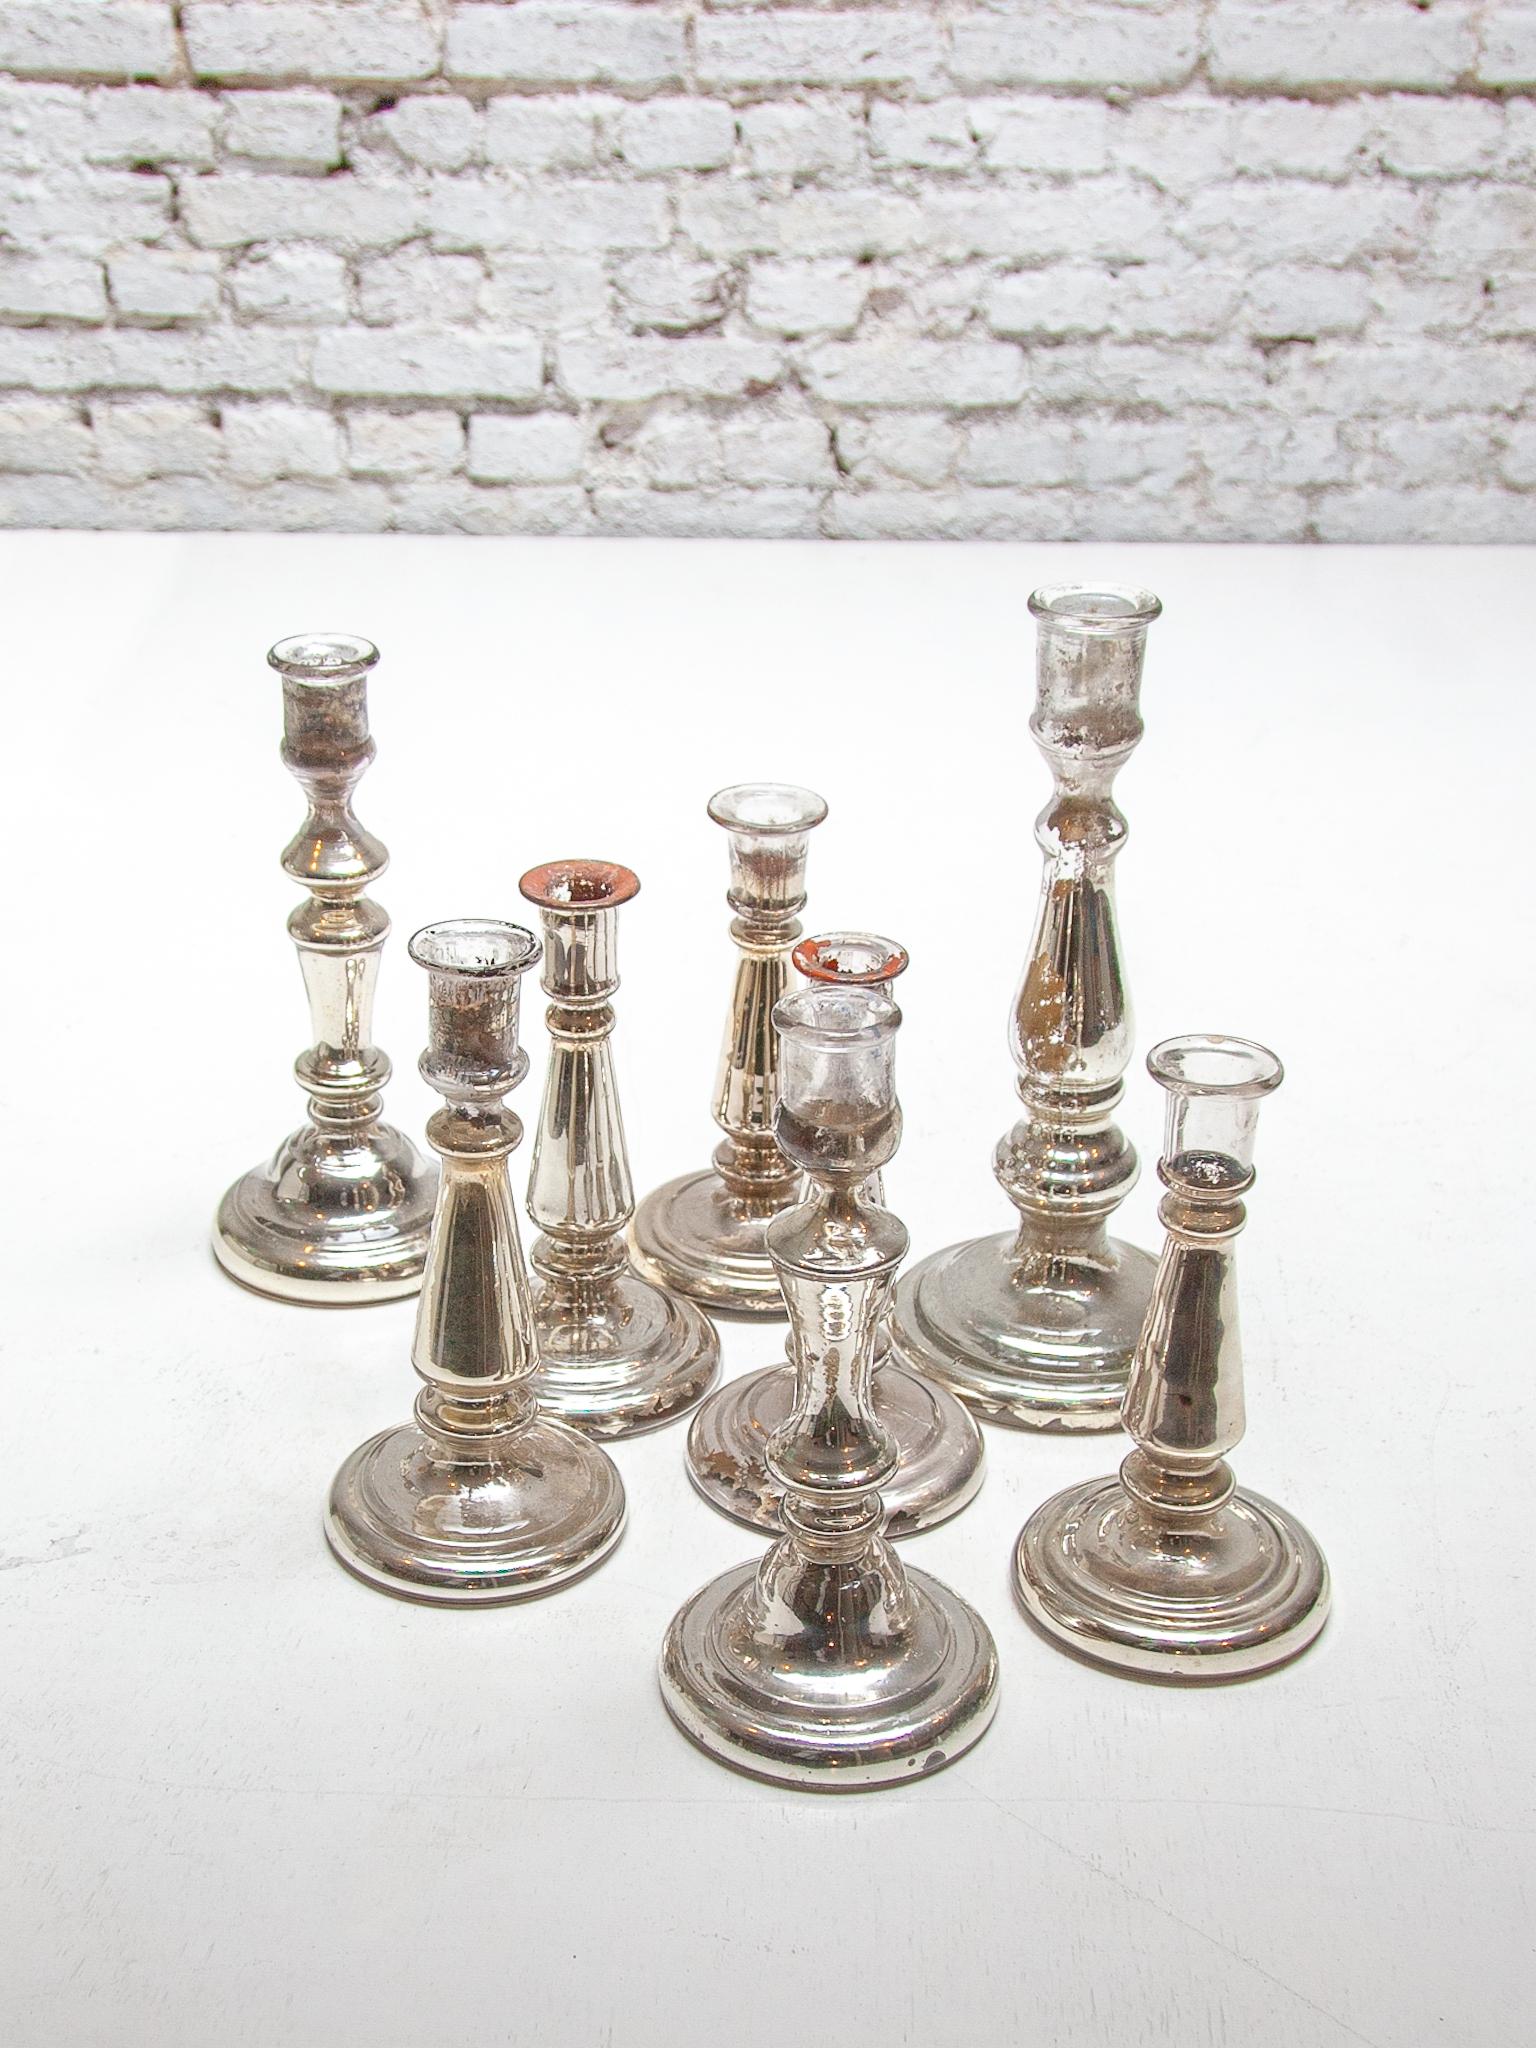 A very decorative set of seven different glass-silver candlesticks C 1900-1920. Each candlestick made of poor man's silver is made of double-walled glass that is silver-plated on the inside. Old poor man's silver is often beautifully weathered and